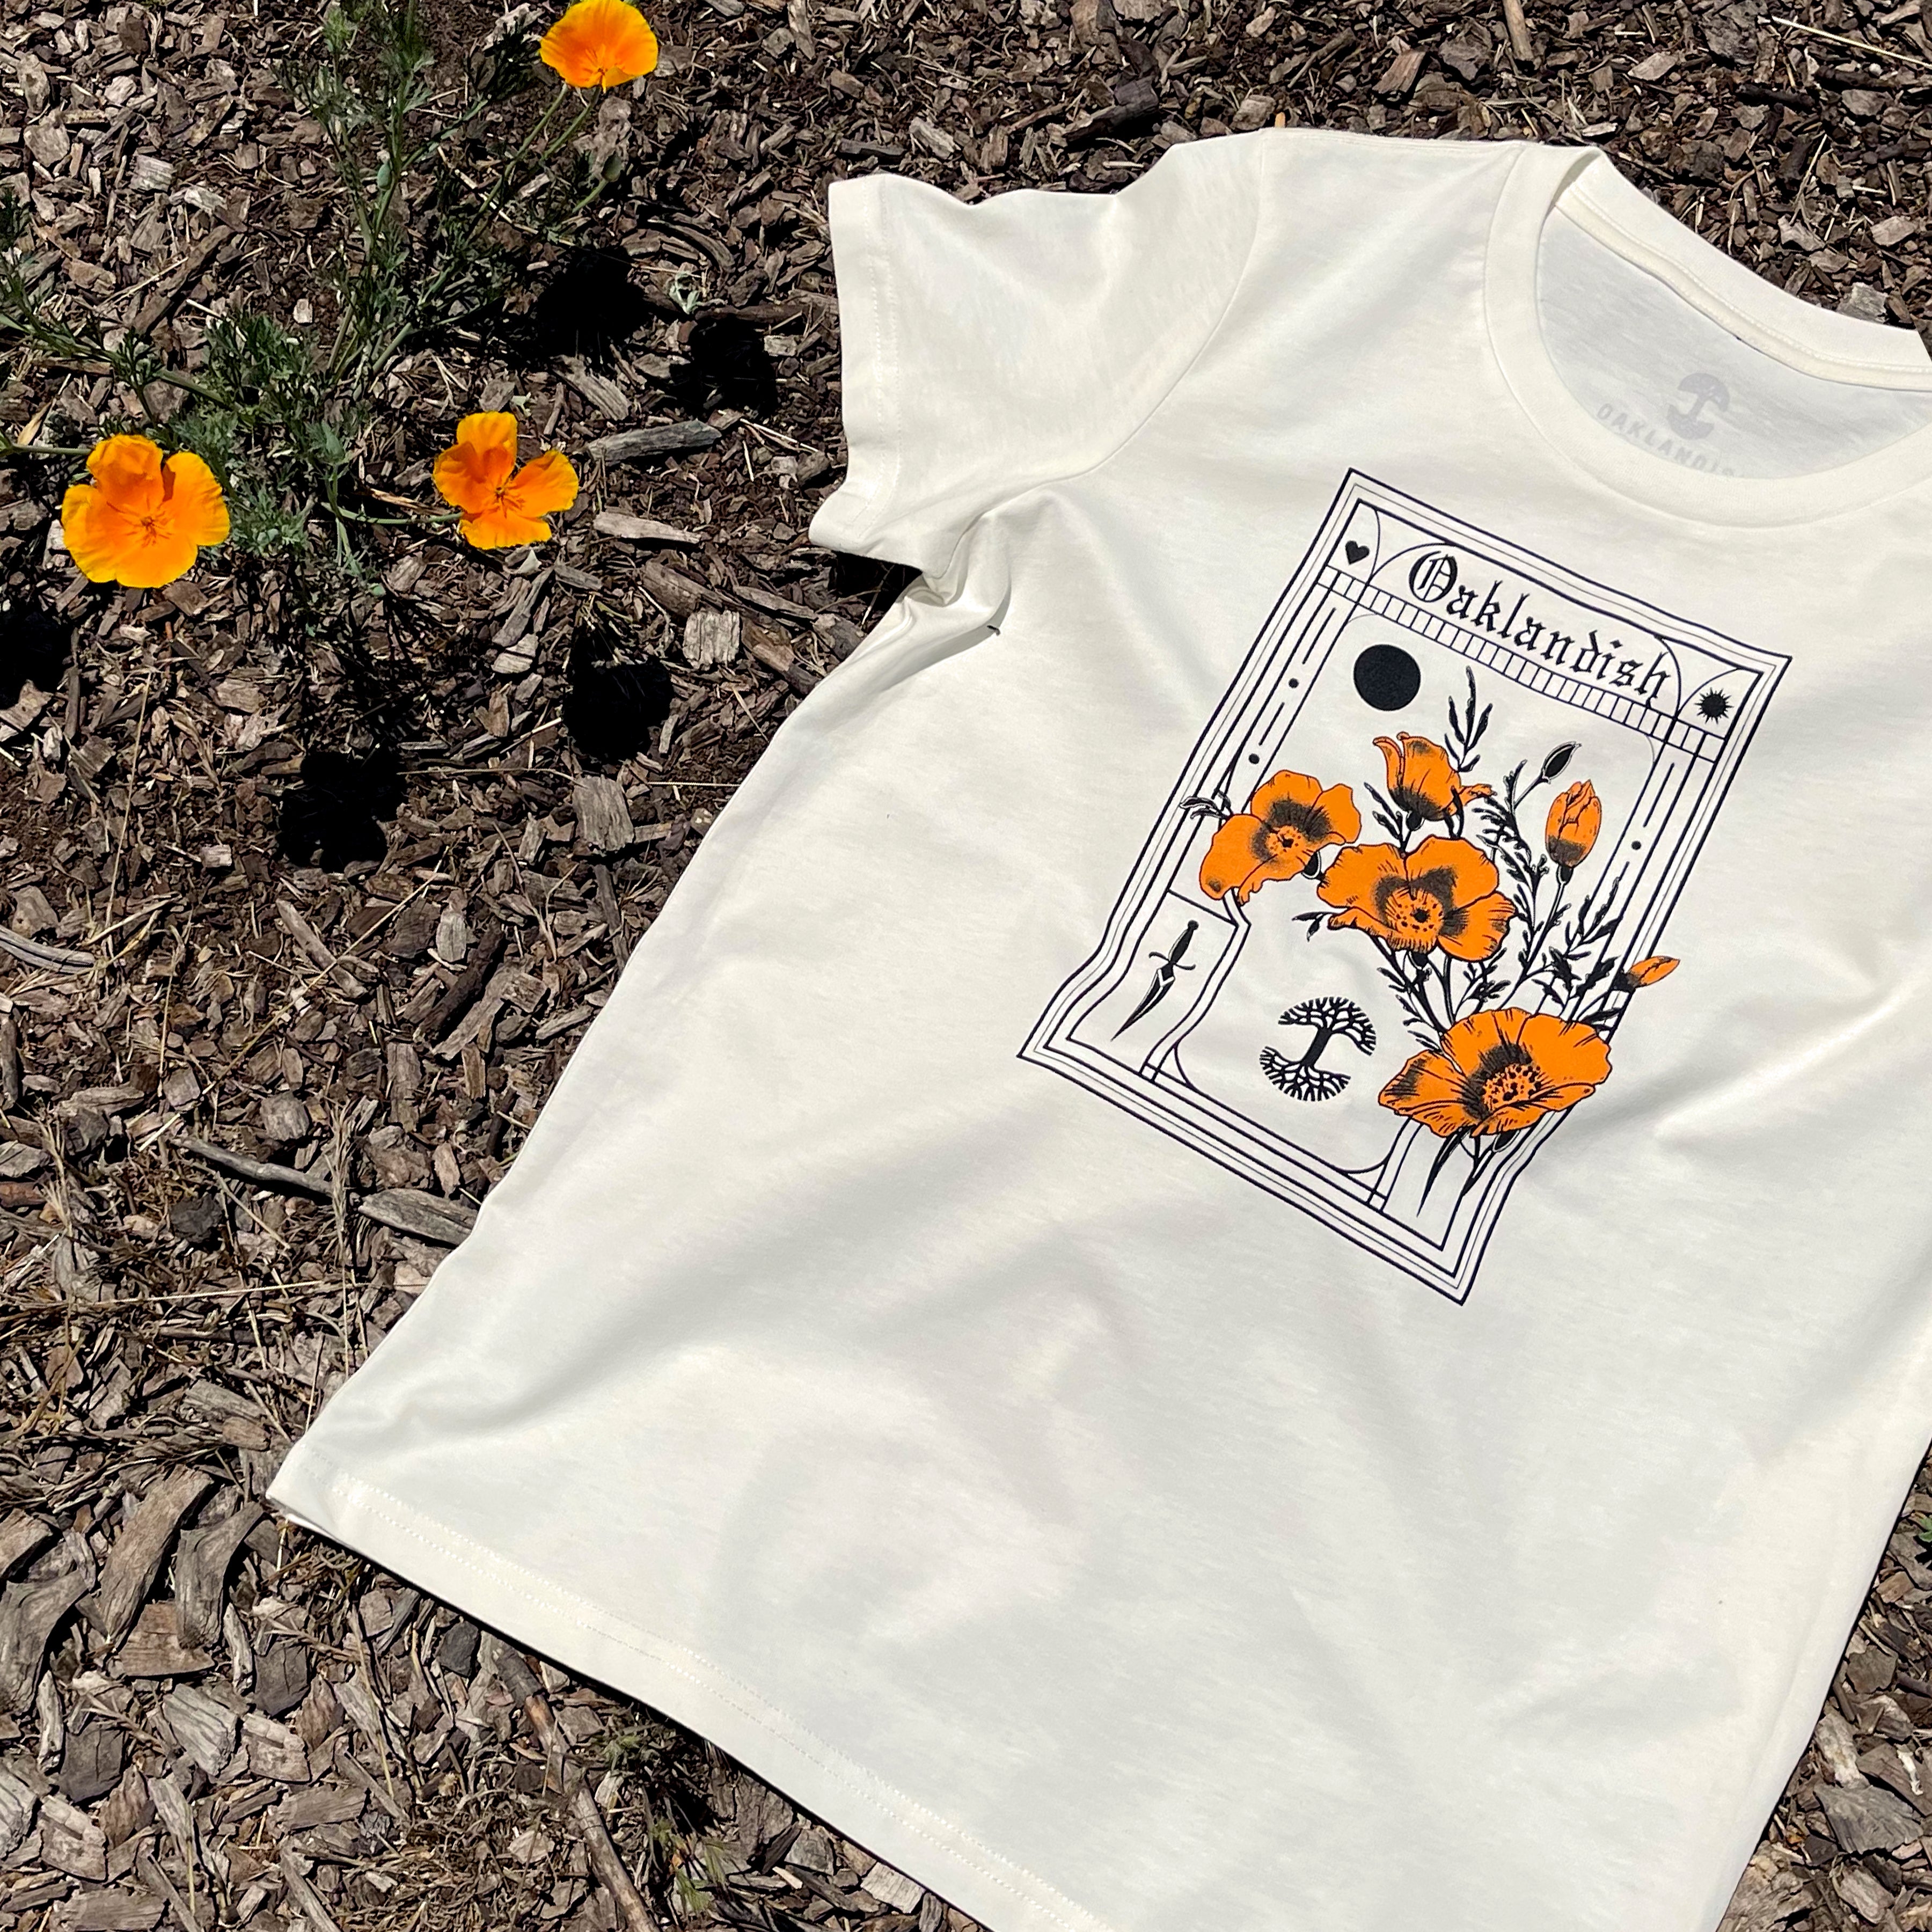 Women’s natural cotton t-shirt with California poppies, an Oaklandish wordmark, and tree logo. on the ground with real poppies.